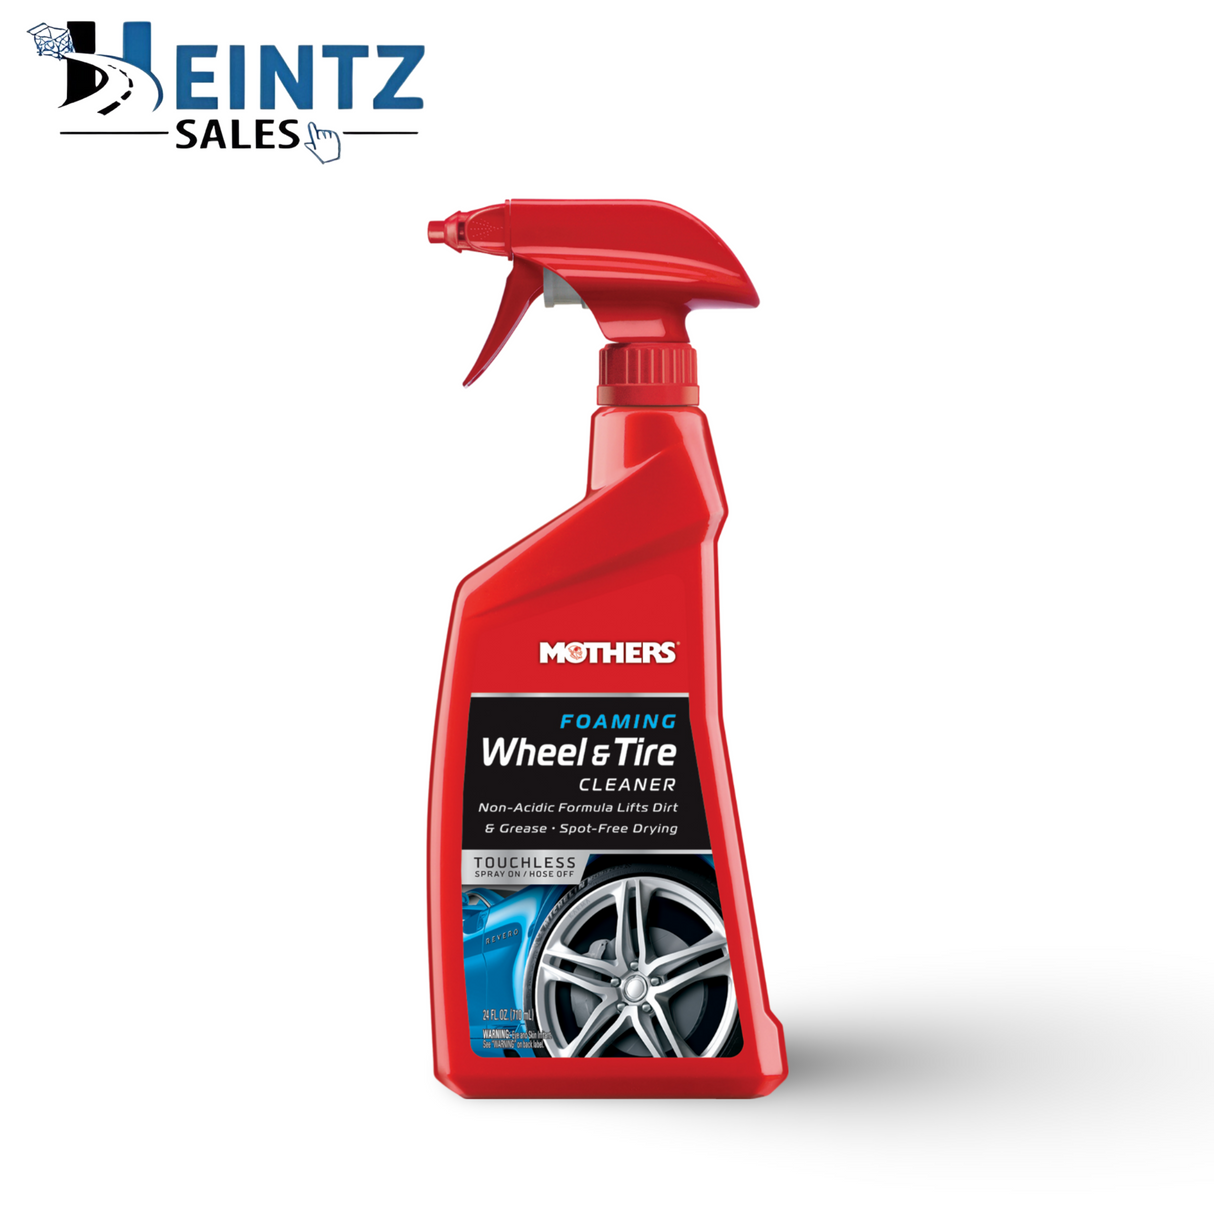 MOTHERS 05924 Foaming Wheel & Tire Cleaner - Non-Acidic - Spot Free - 24 oz.